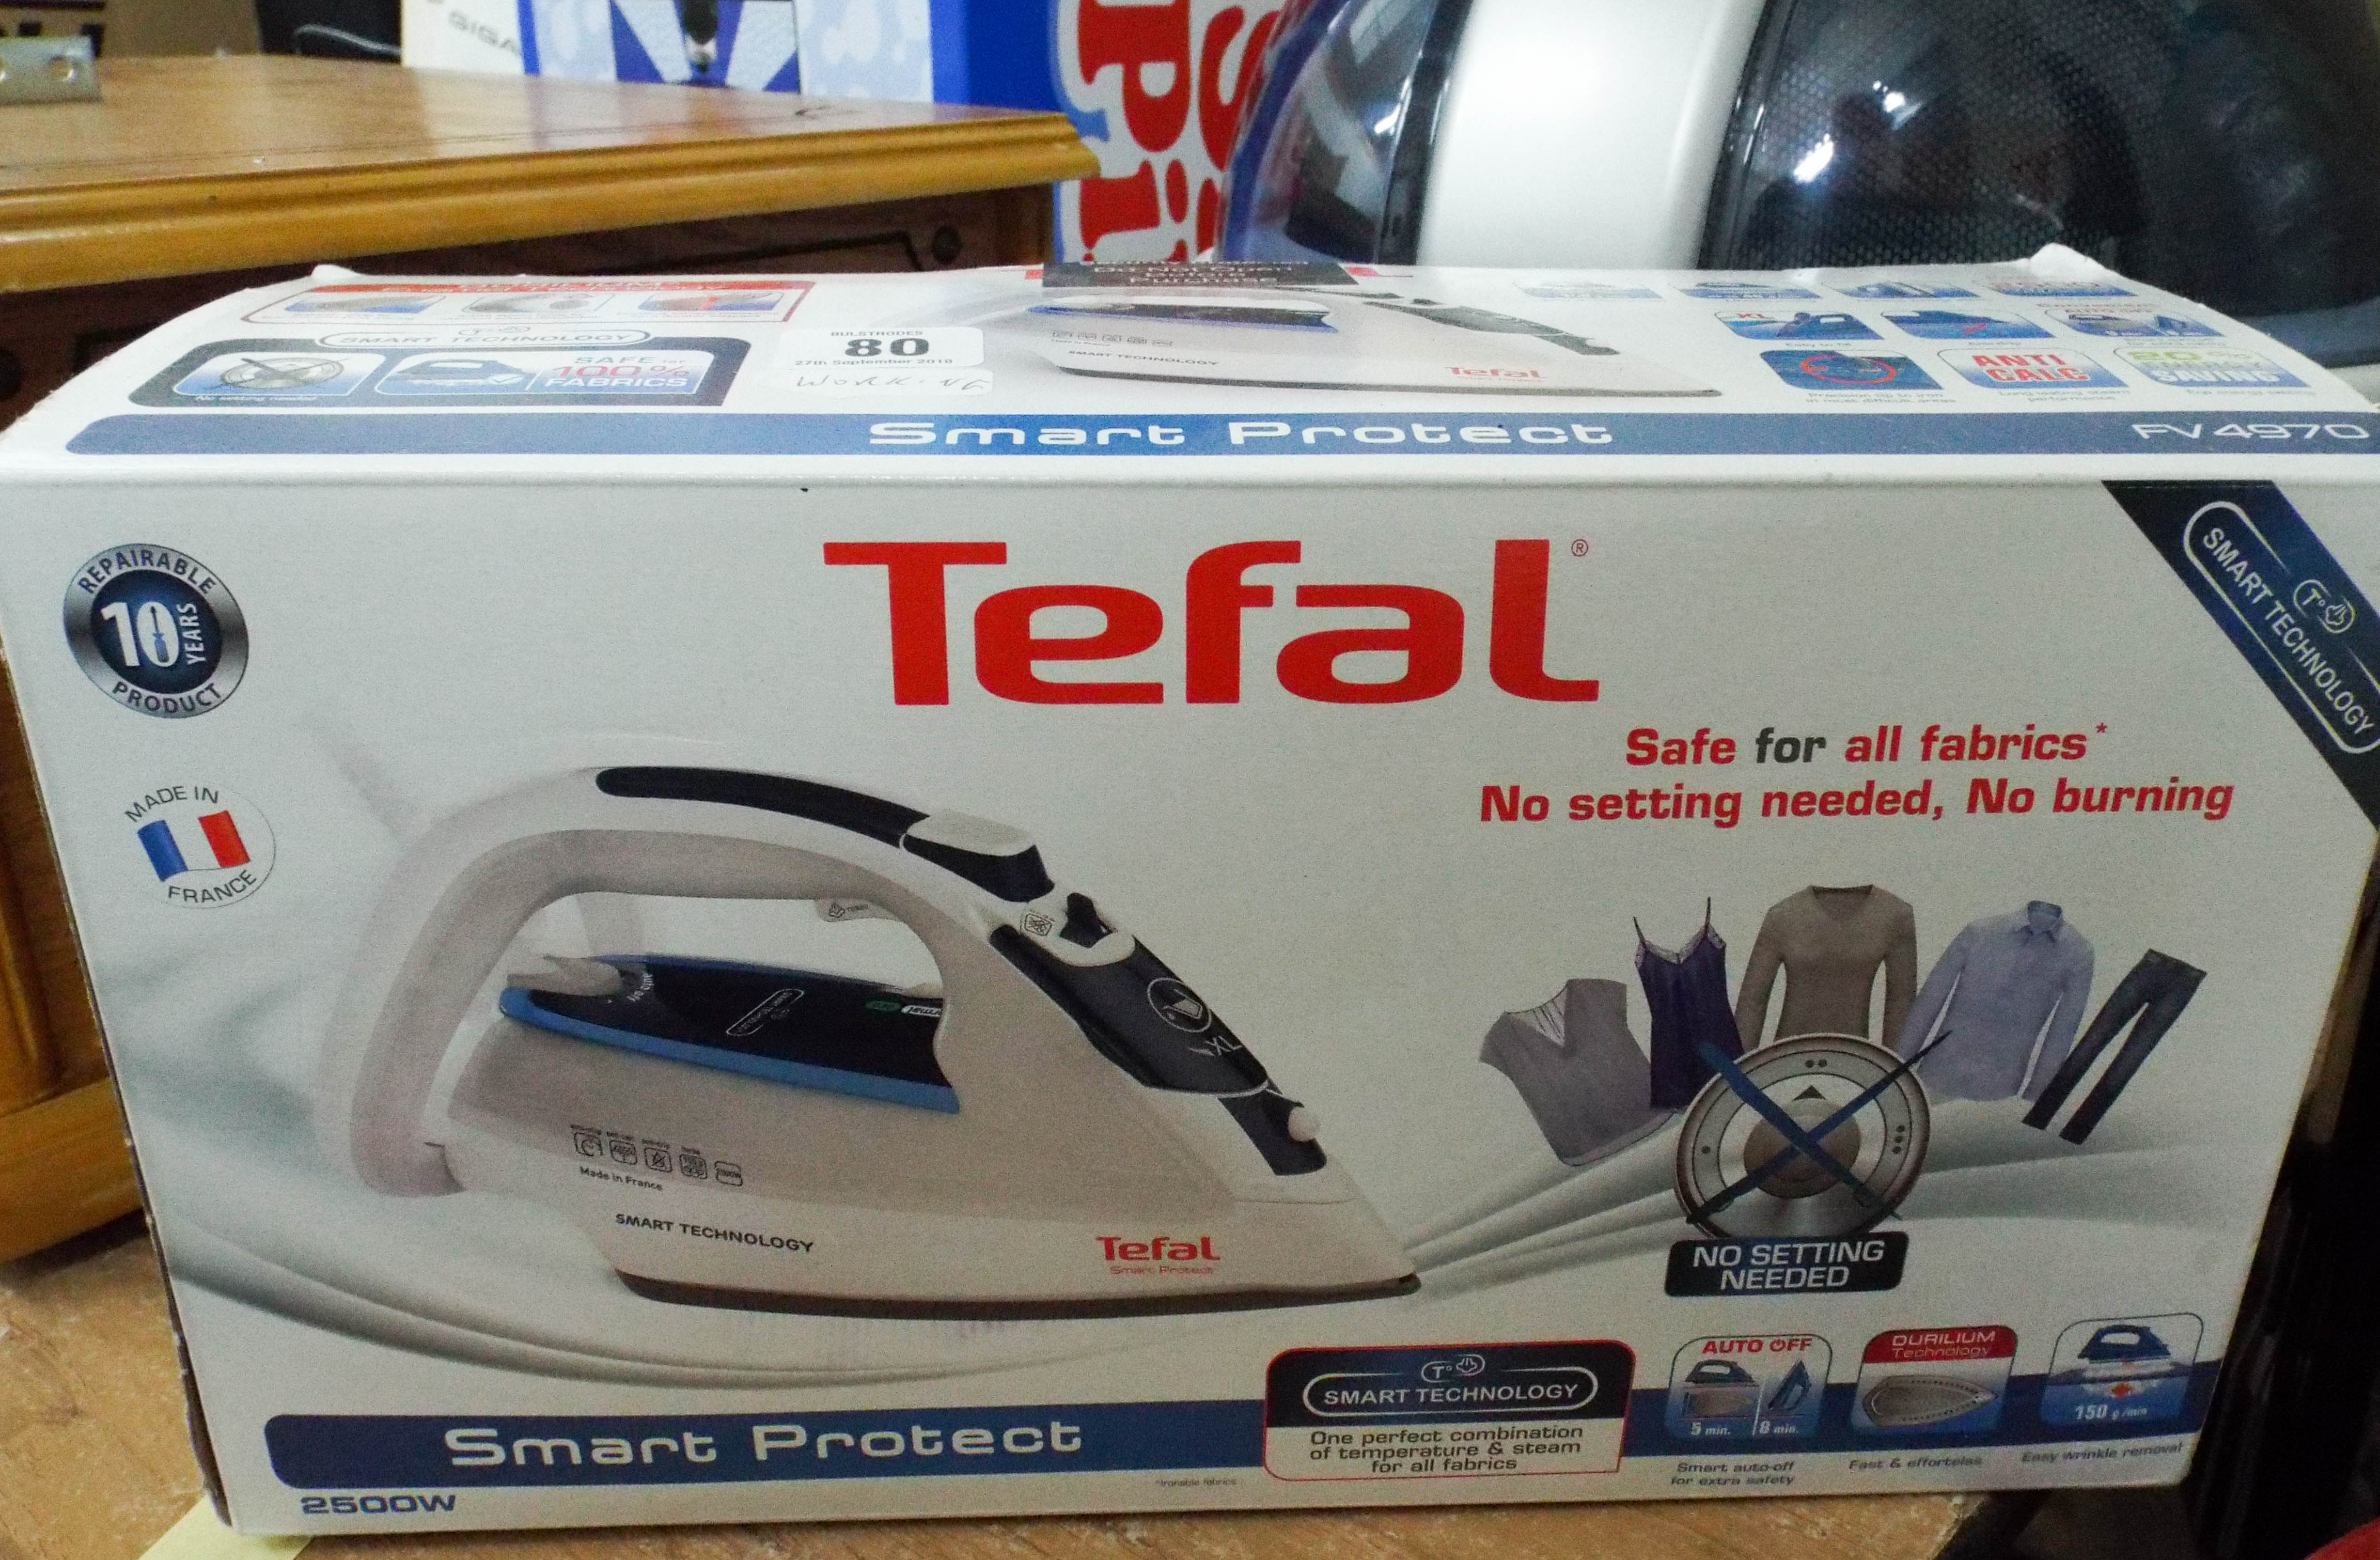 A Tefal smart protect iron in full working order